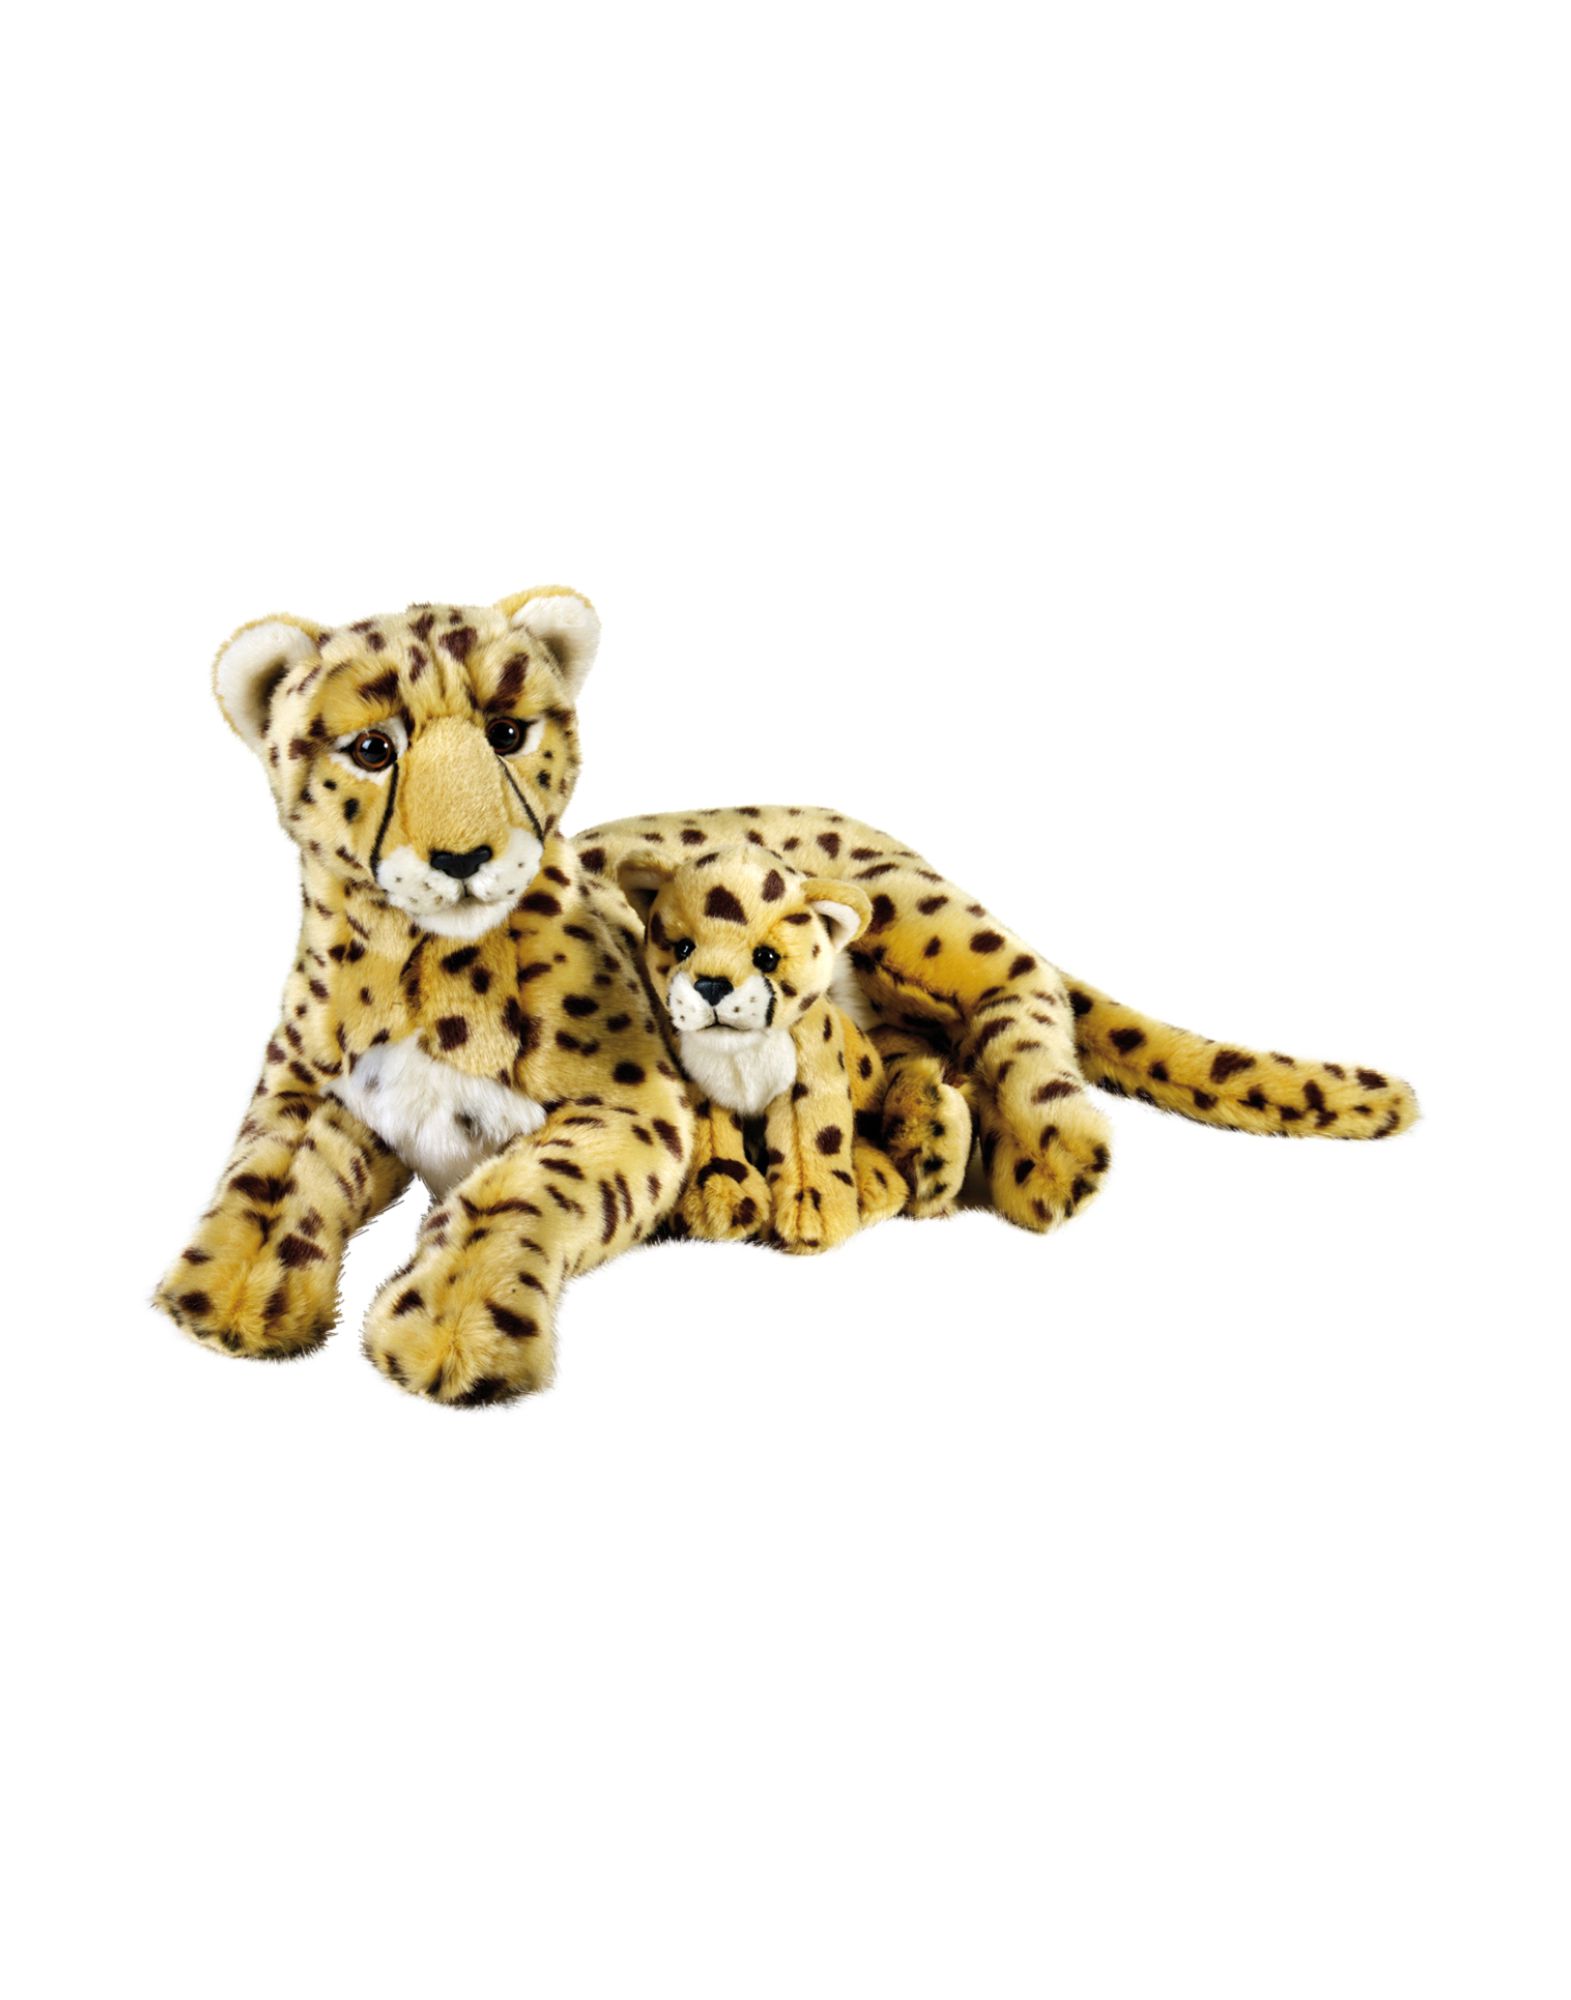 NATIONAL GEOGRAPHIC Dolls and soft toys